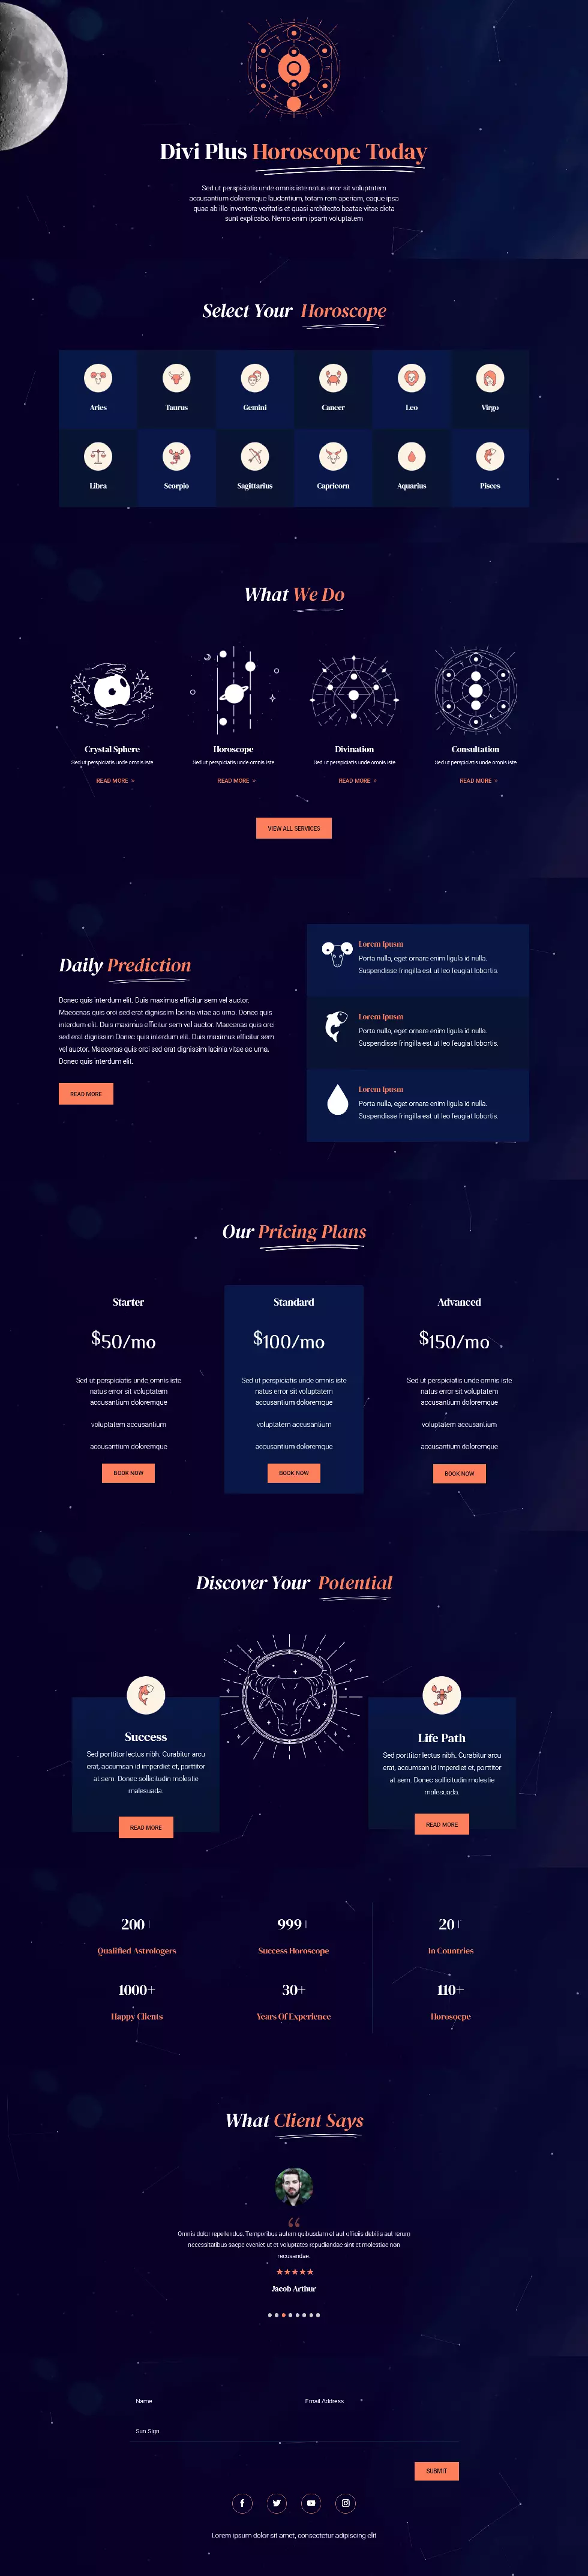 Astrology layout by Divi Plus